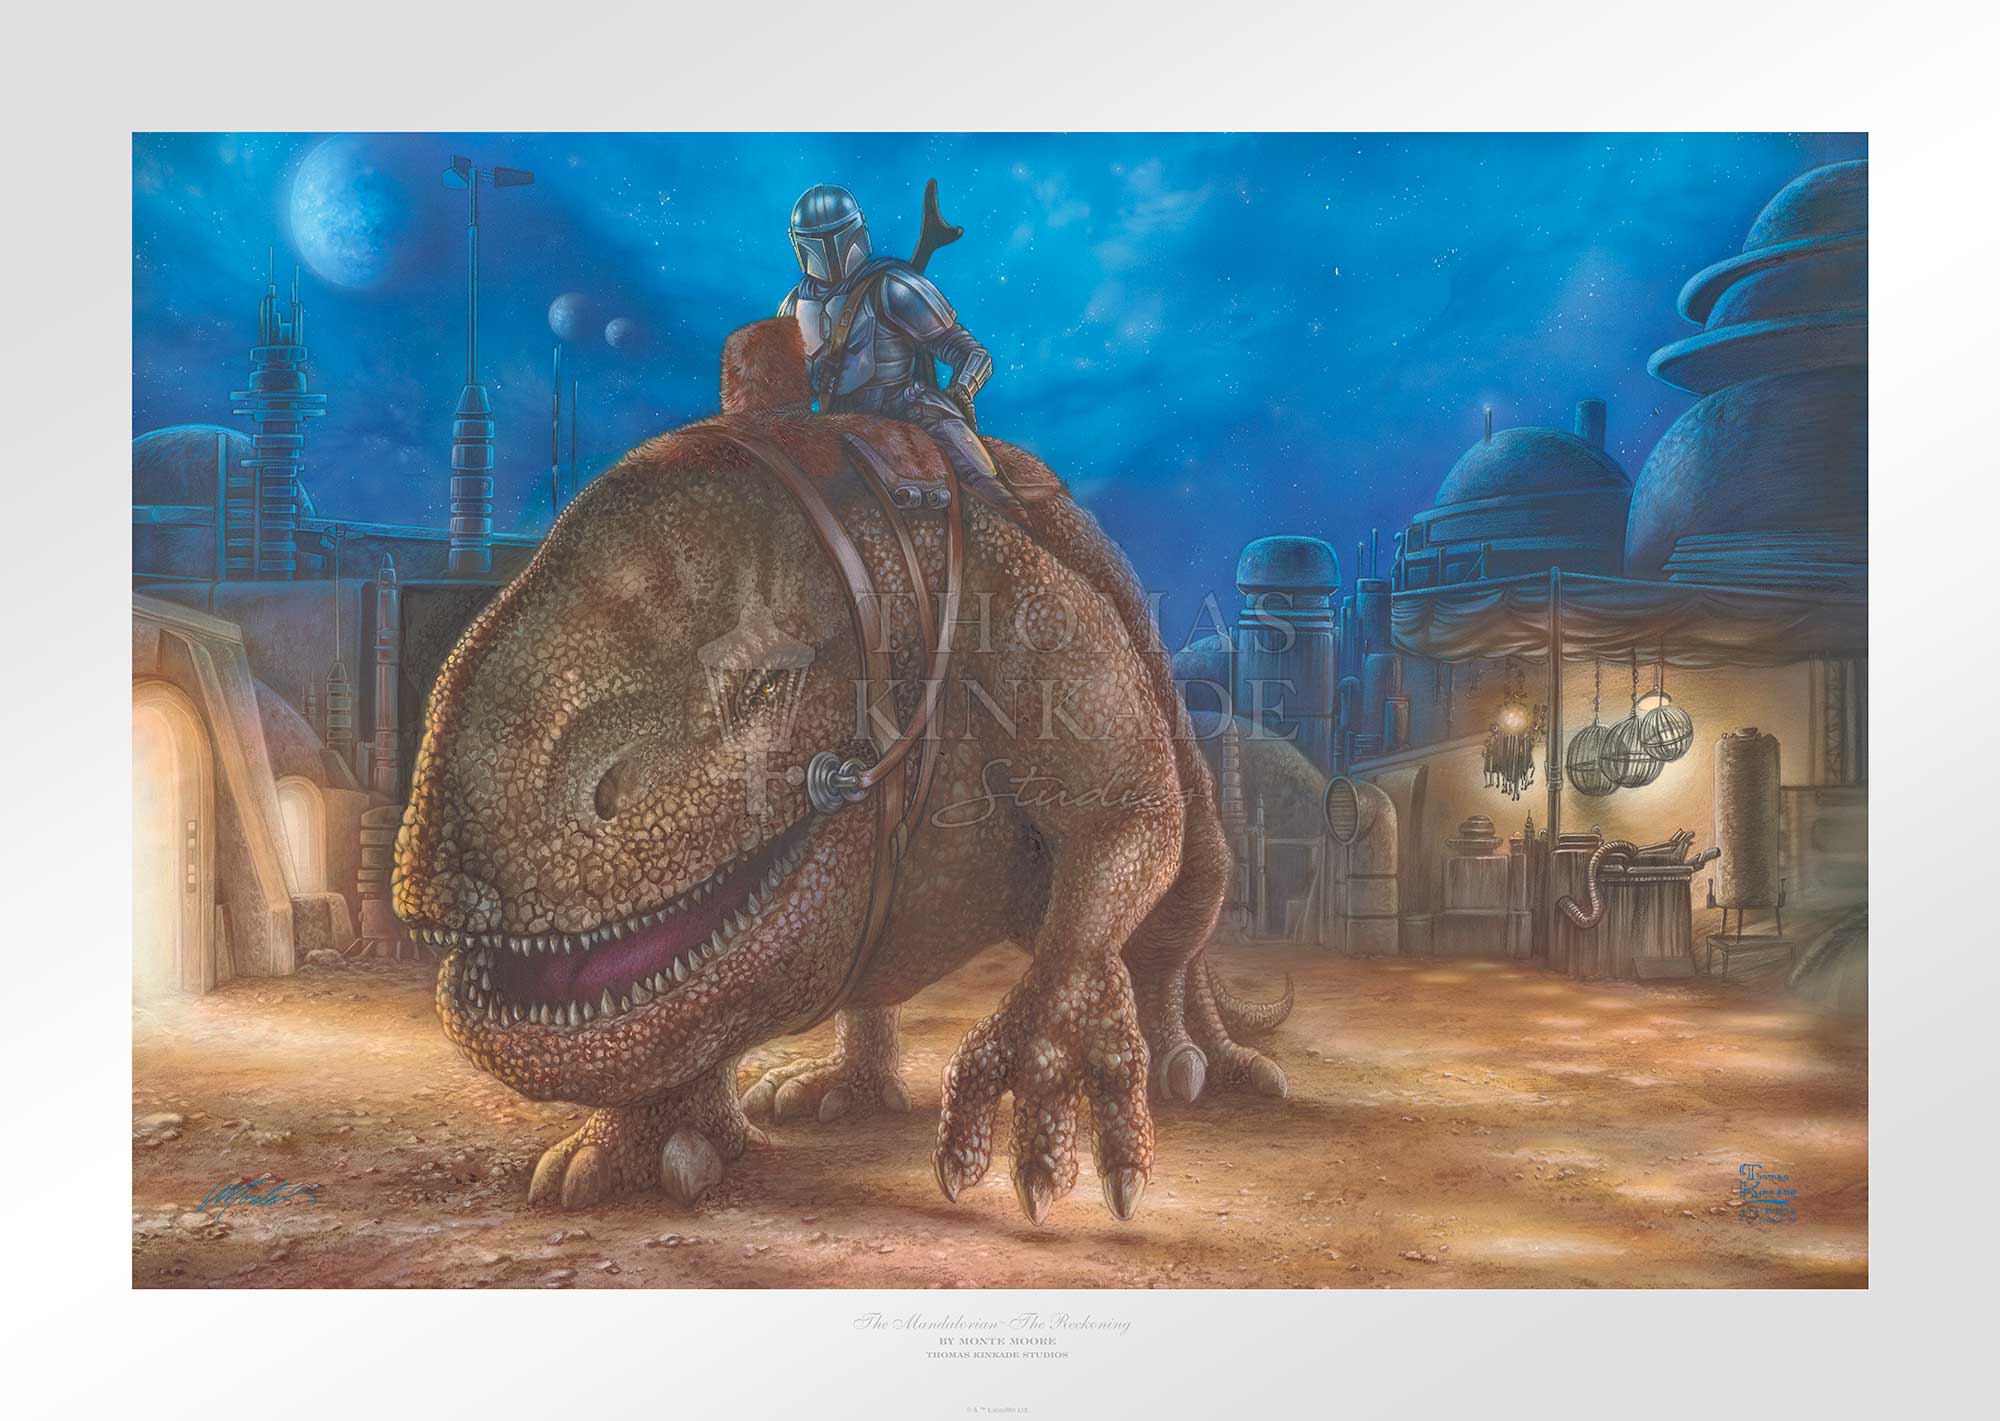 The Reckoning By Monte Moore  Thomas Kinkade Studios presents the newest addition to The Mandalorian Collection - The Mandalorian - The Reckoning by Monte Moore. In this painting, Monte captures an exciting moment from Chapter 5 of Lucasfilm's Disney+ series.   - Unframed